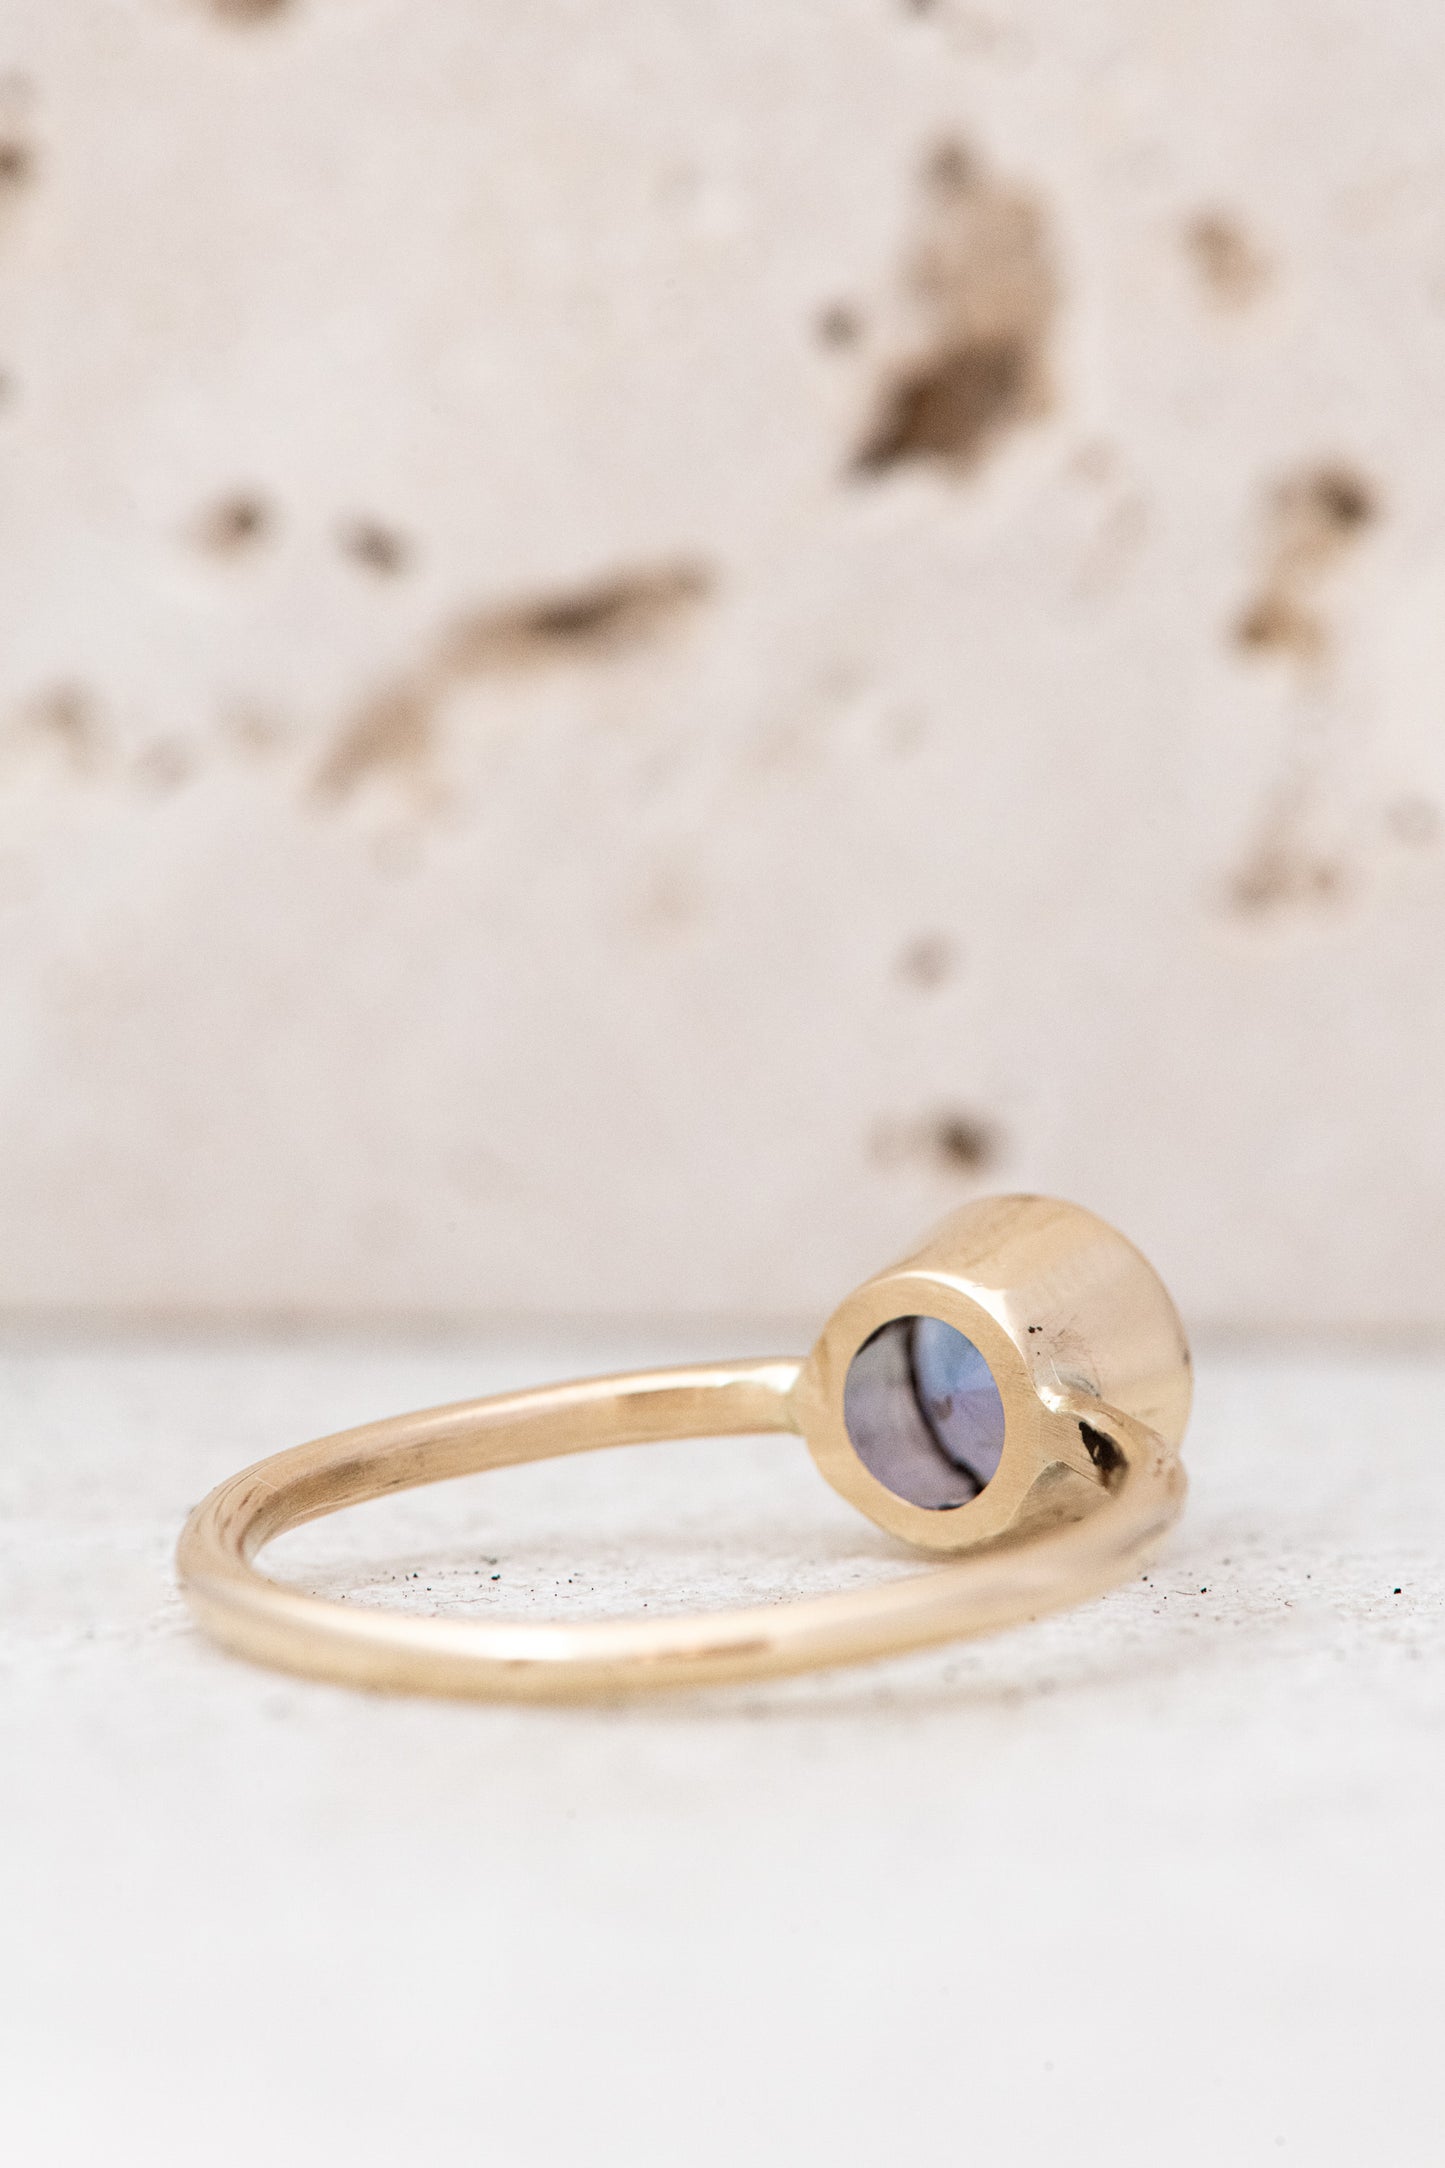 A Handmade Round Tanzanite Solitaire Ring with an abalone stone.